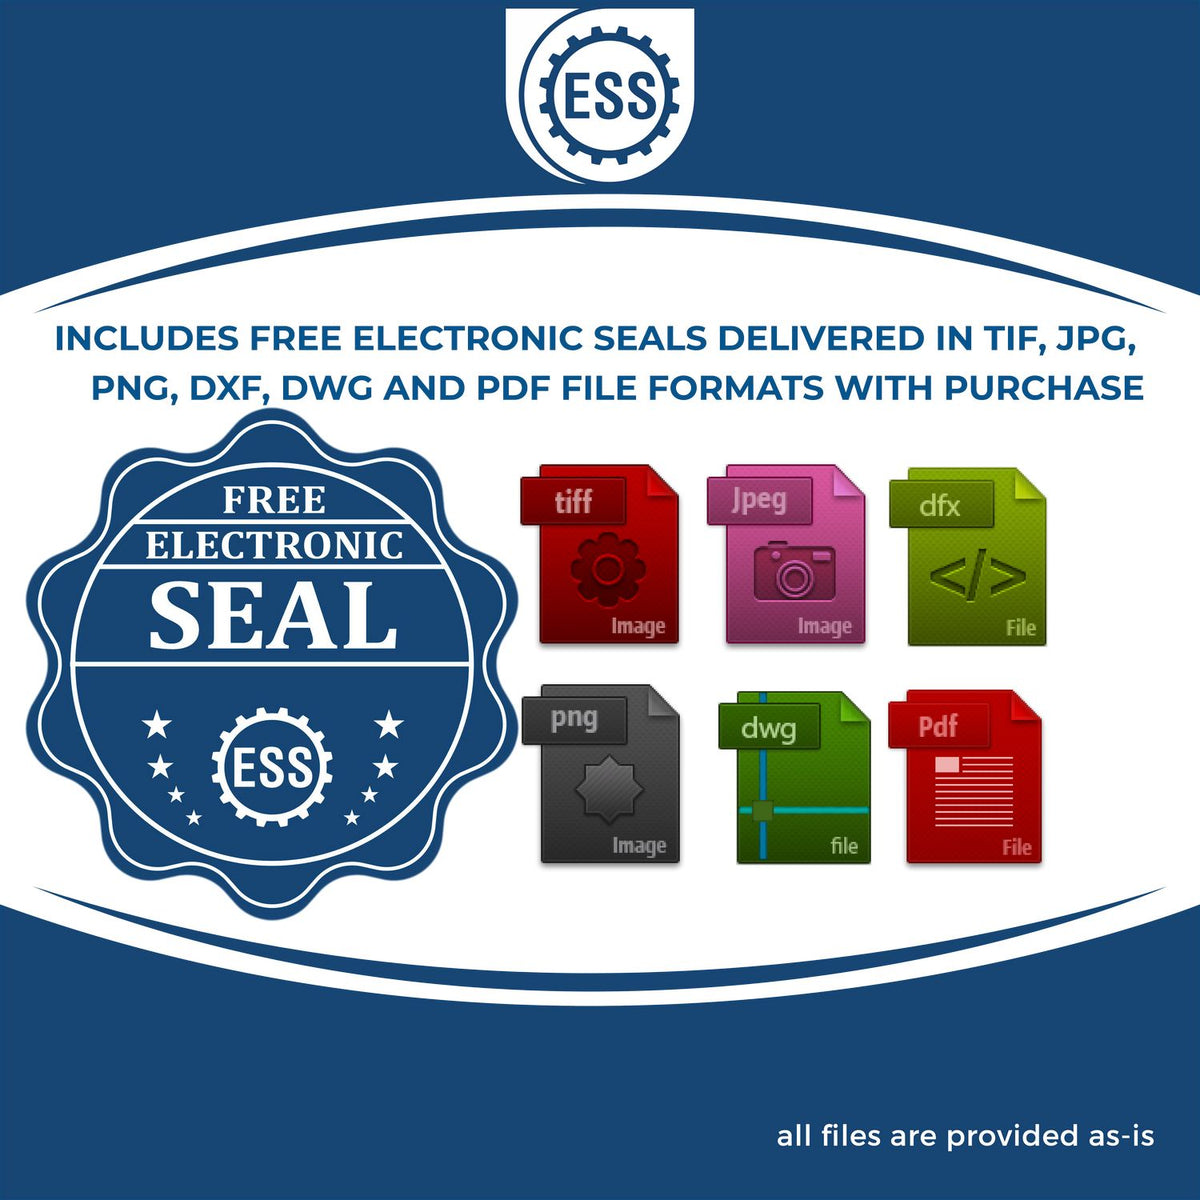 An infographic for the free electronic seal for the Gift Illinois Geologist Seal illustrating the different file type icons such as DXF, DWG, TIF, JPG and PNG.